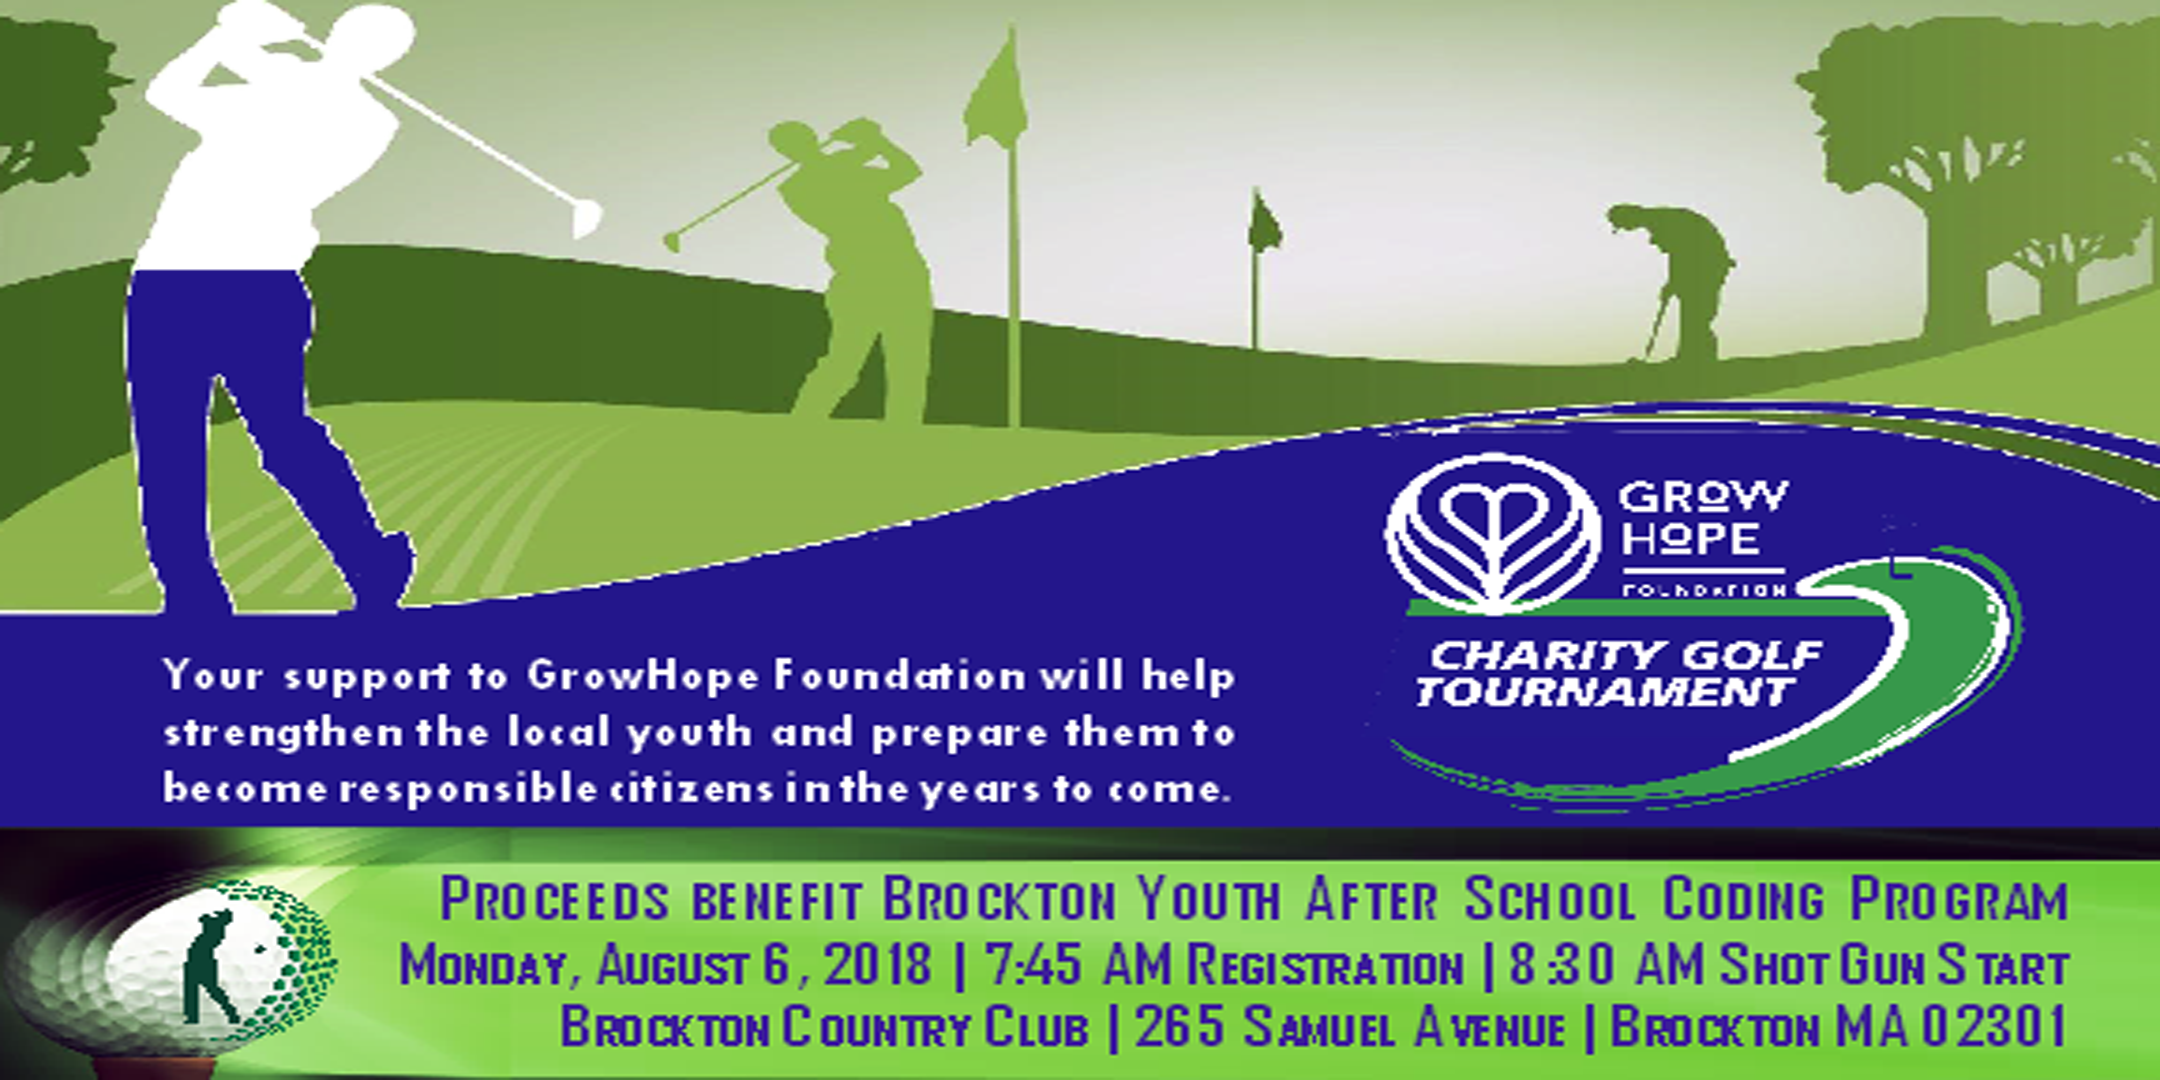 GrowHope Foundation Charity Golf Tournament